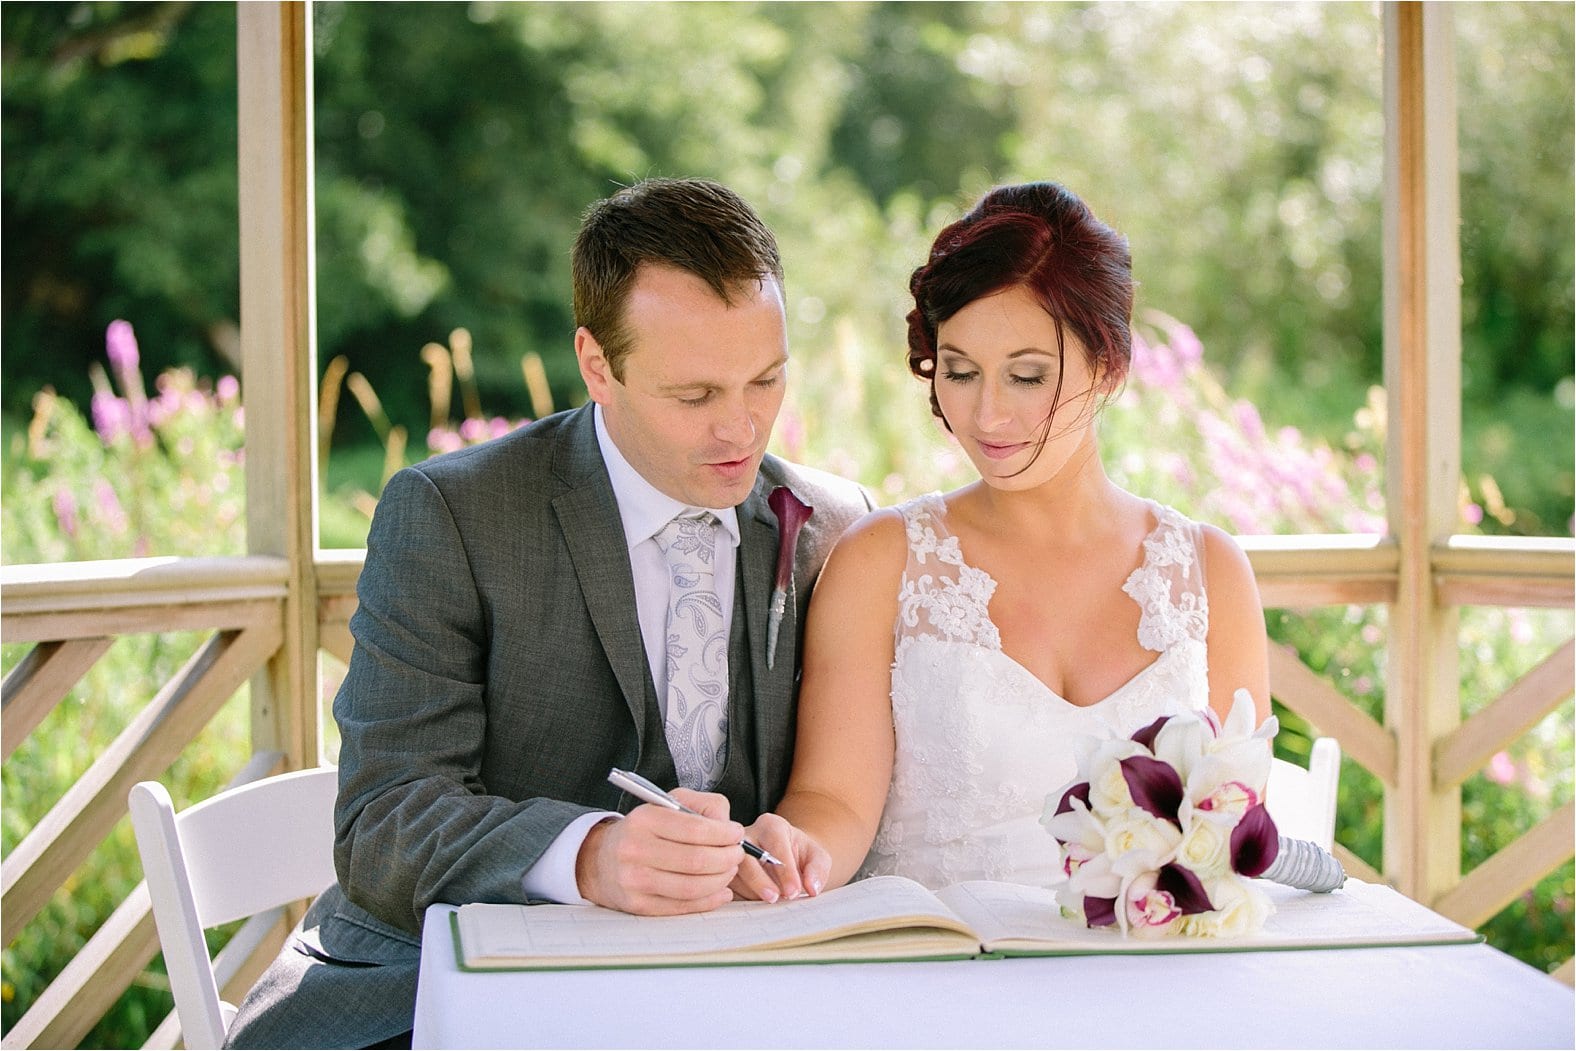 Devon weddings by Younger photography